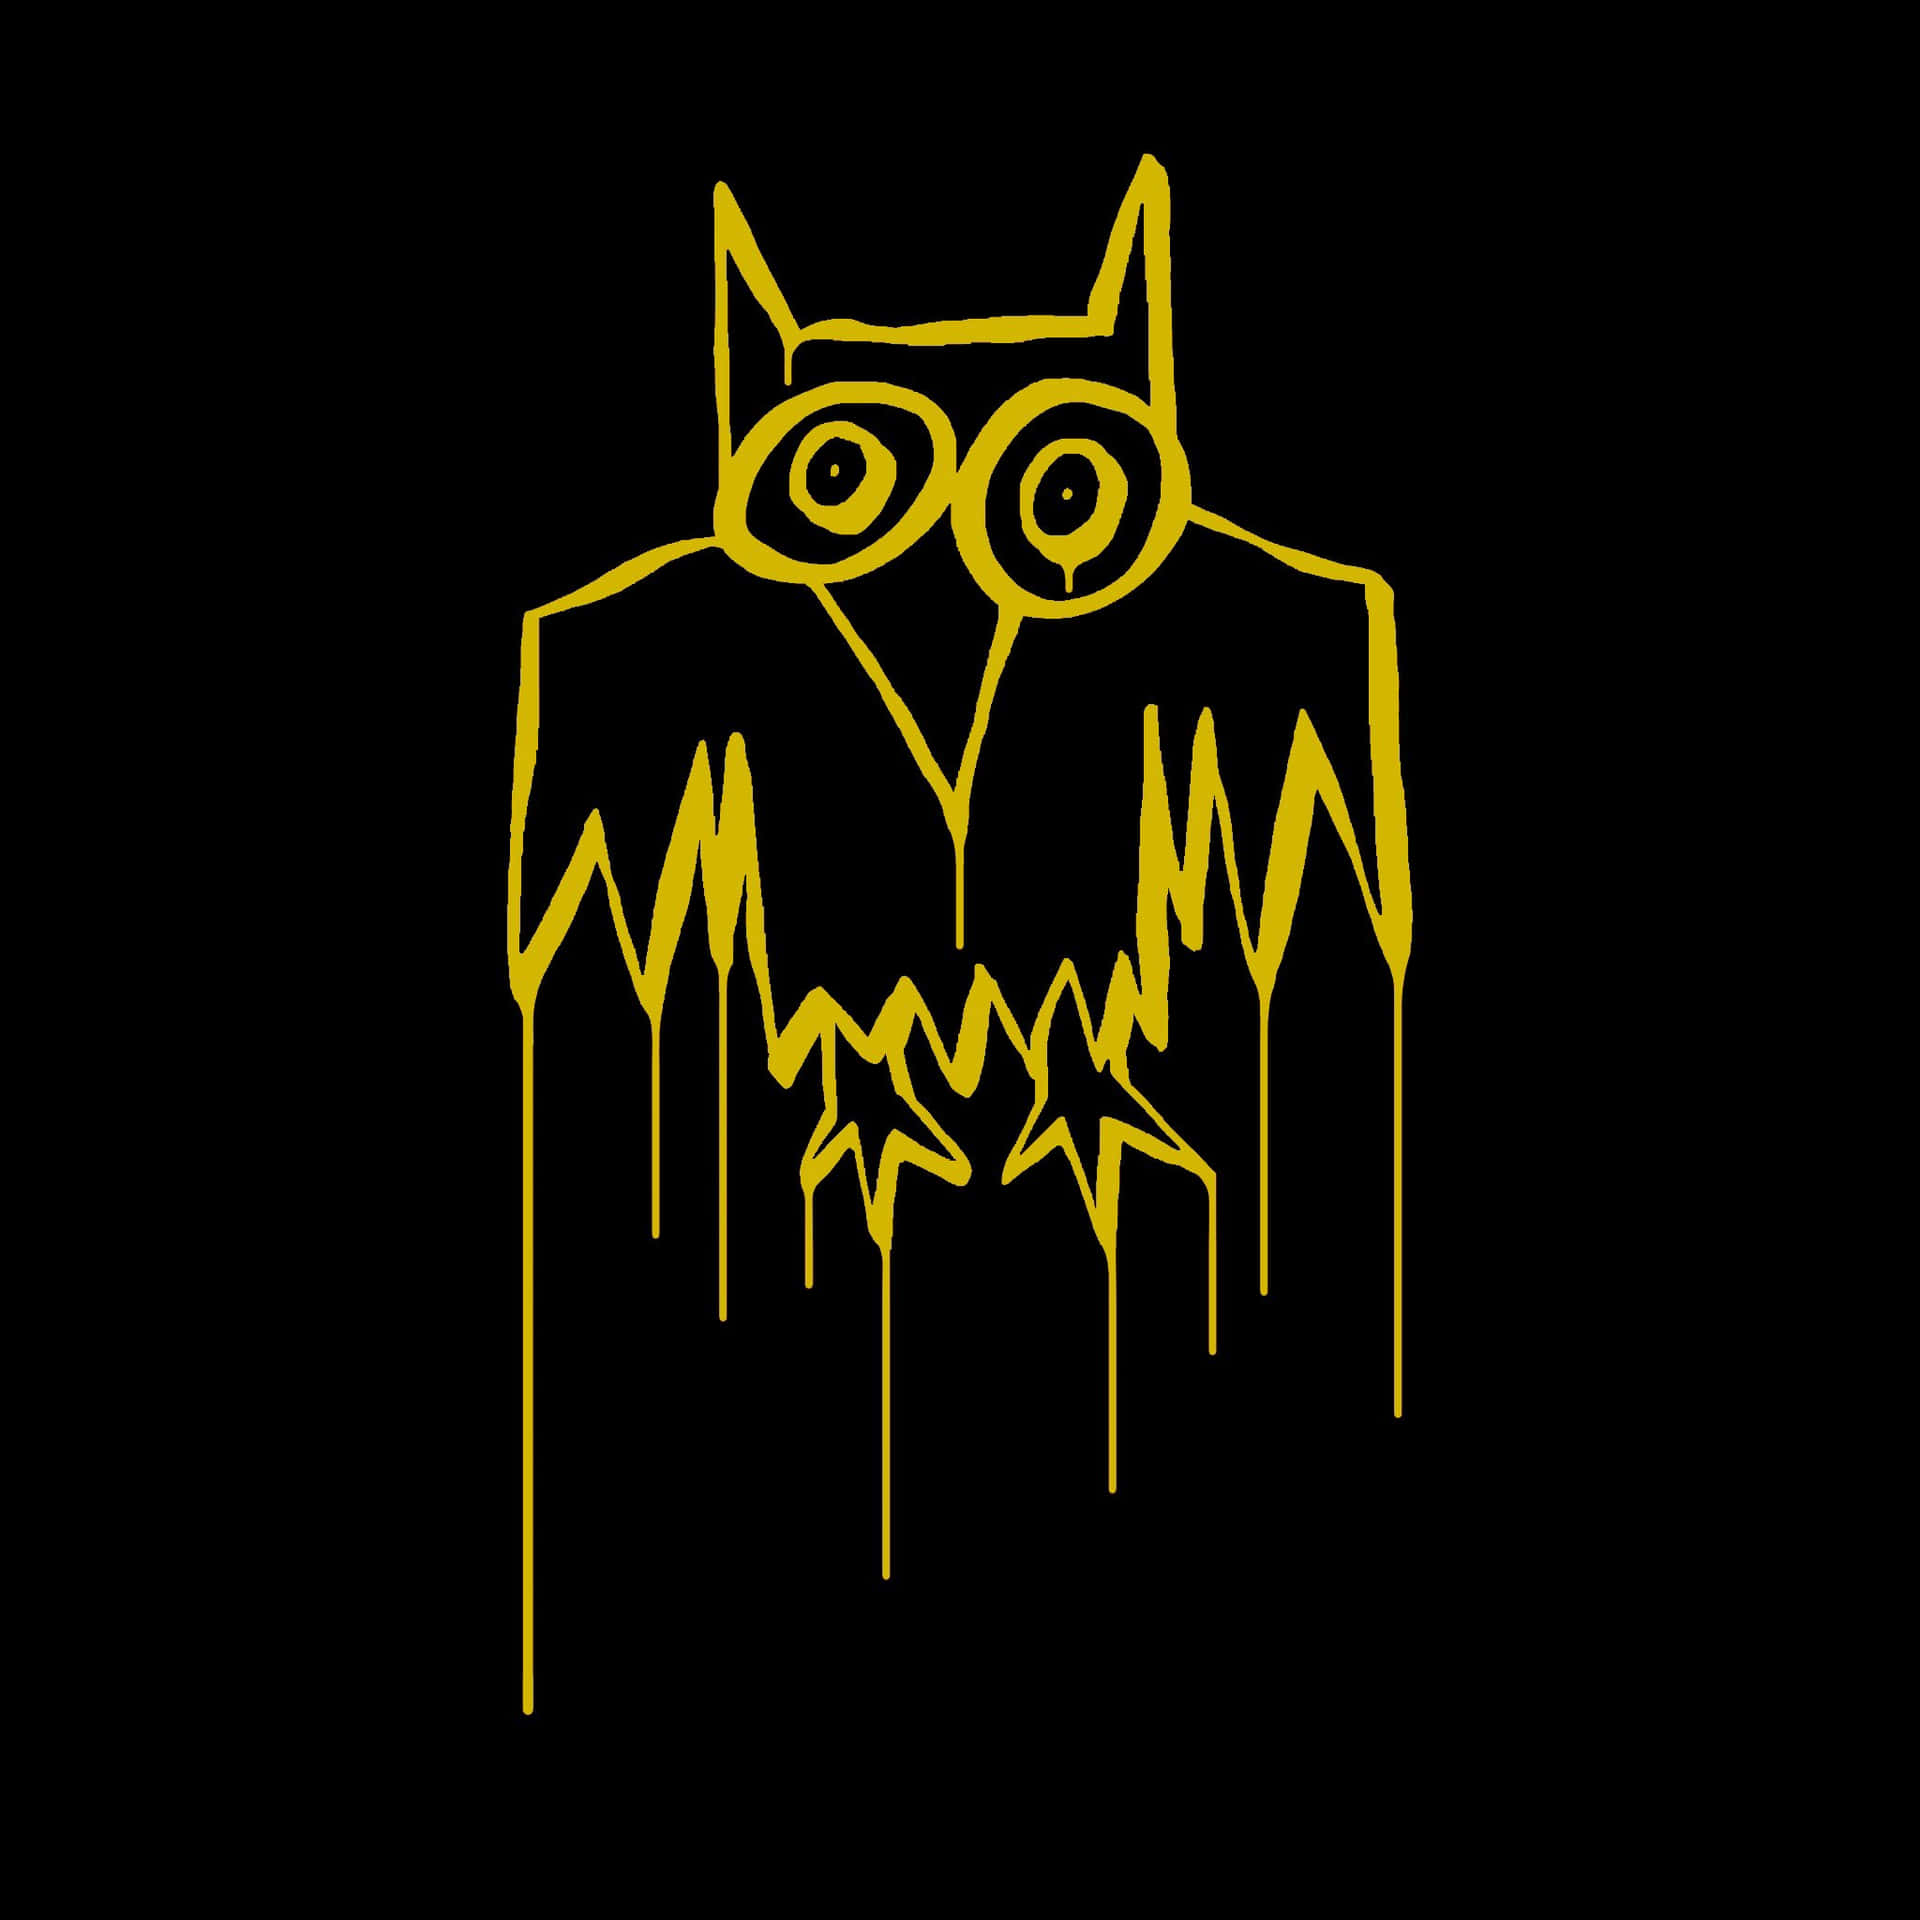 Follow @ovoxo for some of the highest quality audio and visual entertainment Wallpaper